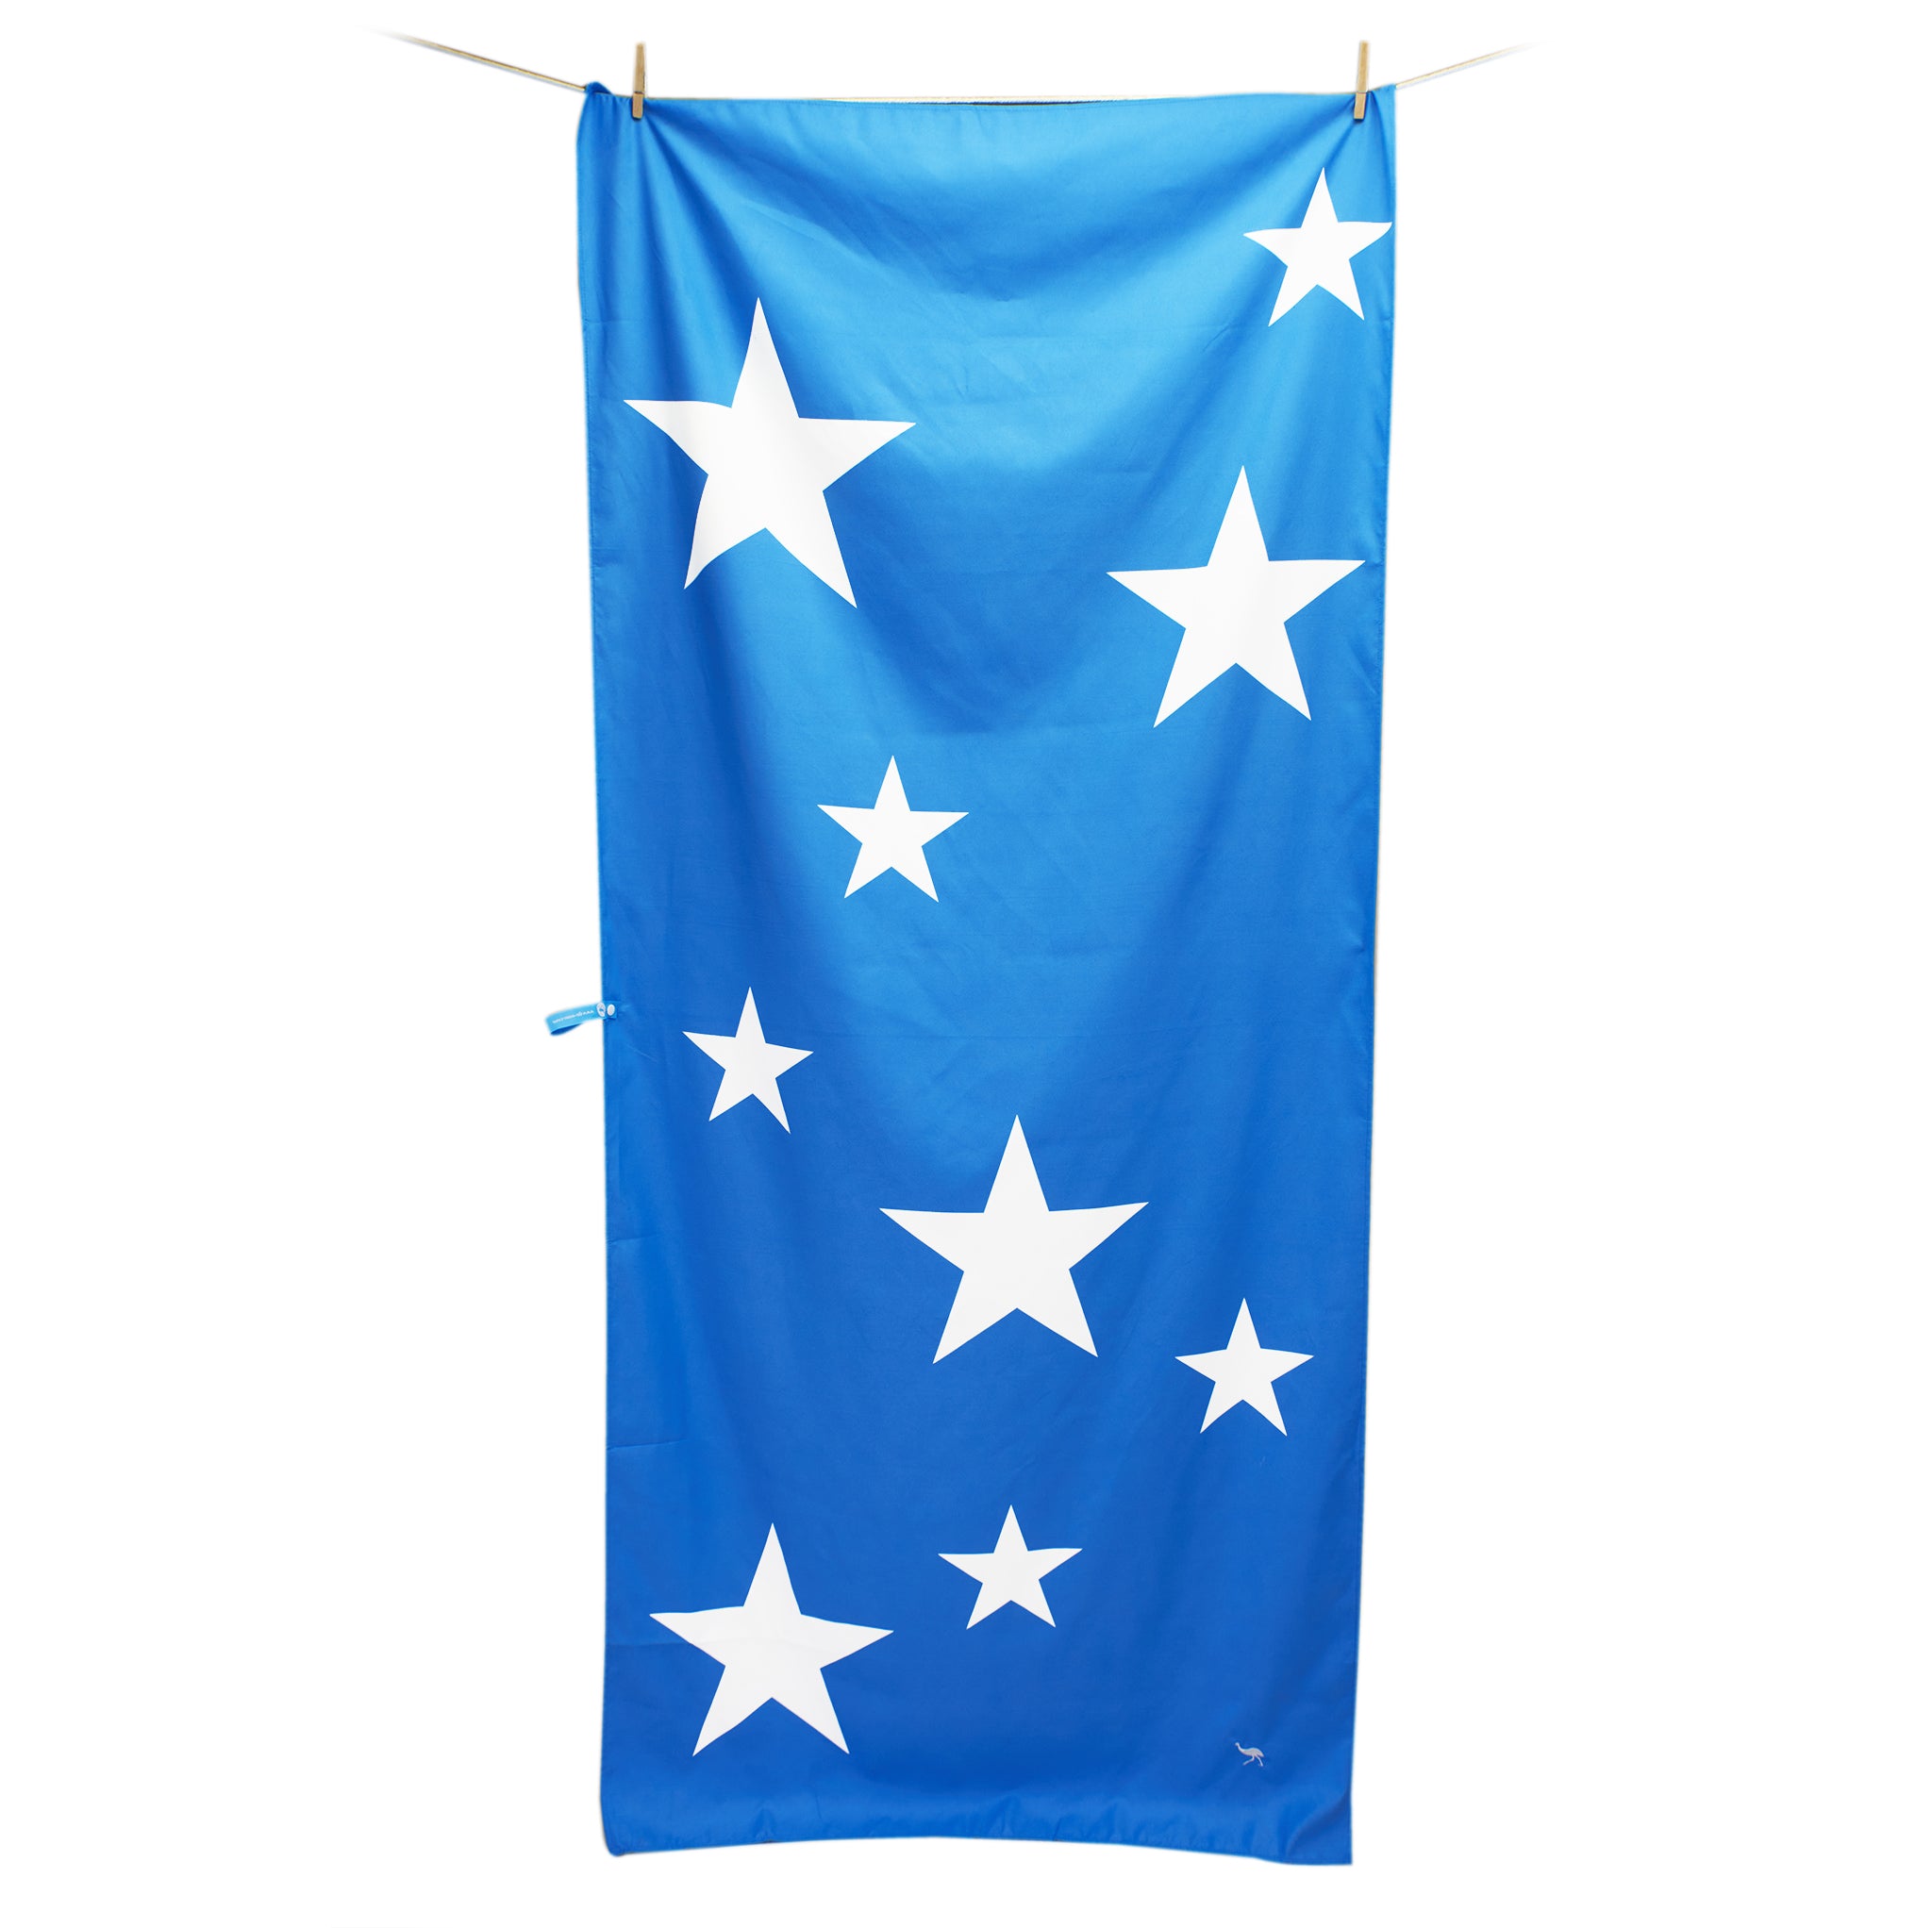 Sustainable Star Towel - Blue